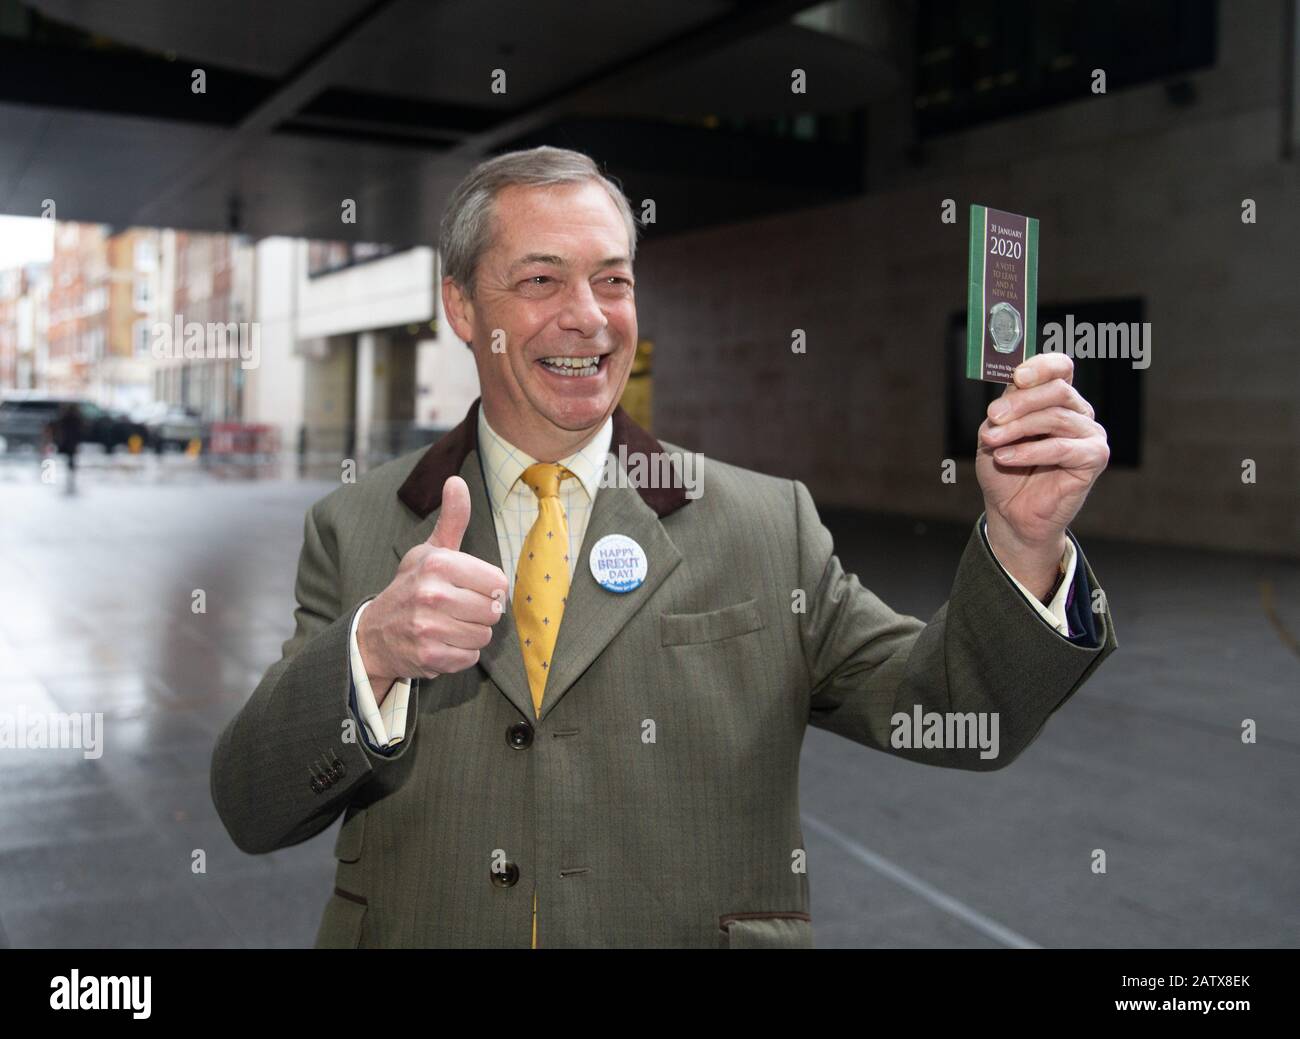 Brexit Party Leader, Nigel Farage, arrives at the BBC Studios holding the commemorative 50p coin, dated 31 Jan 2020 to mark Britain's exit from the EU. Stock Photo